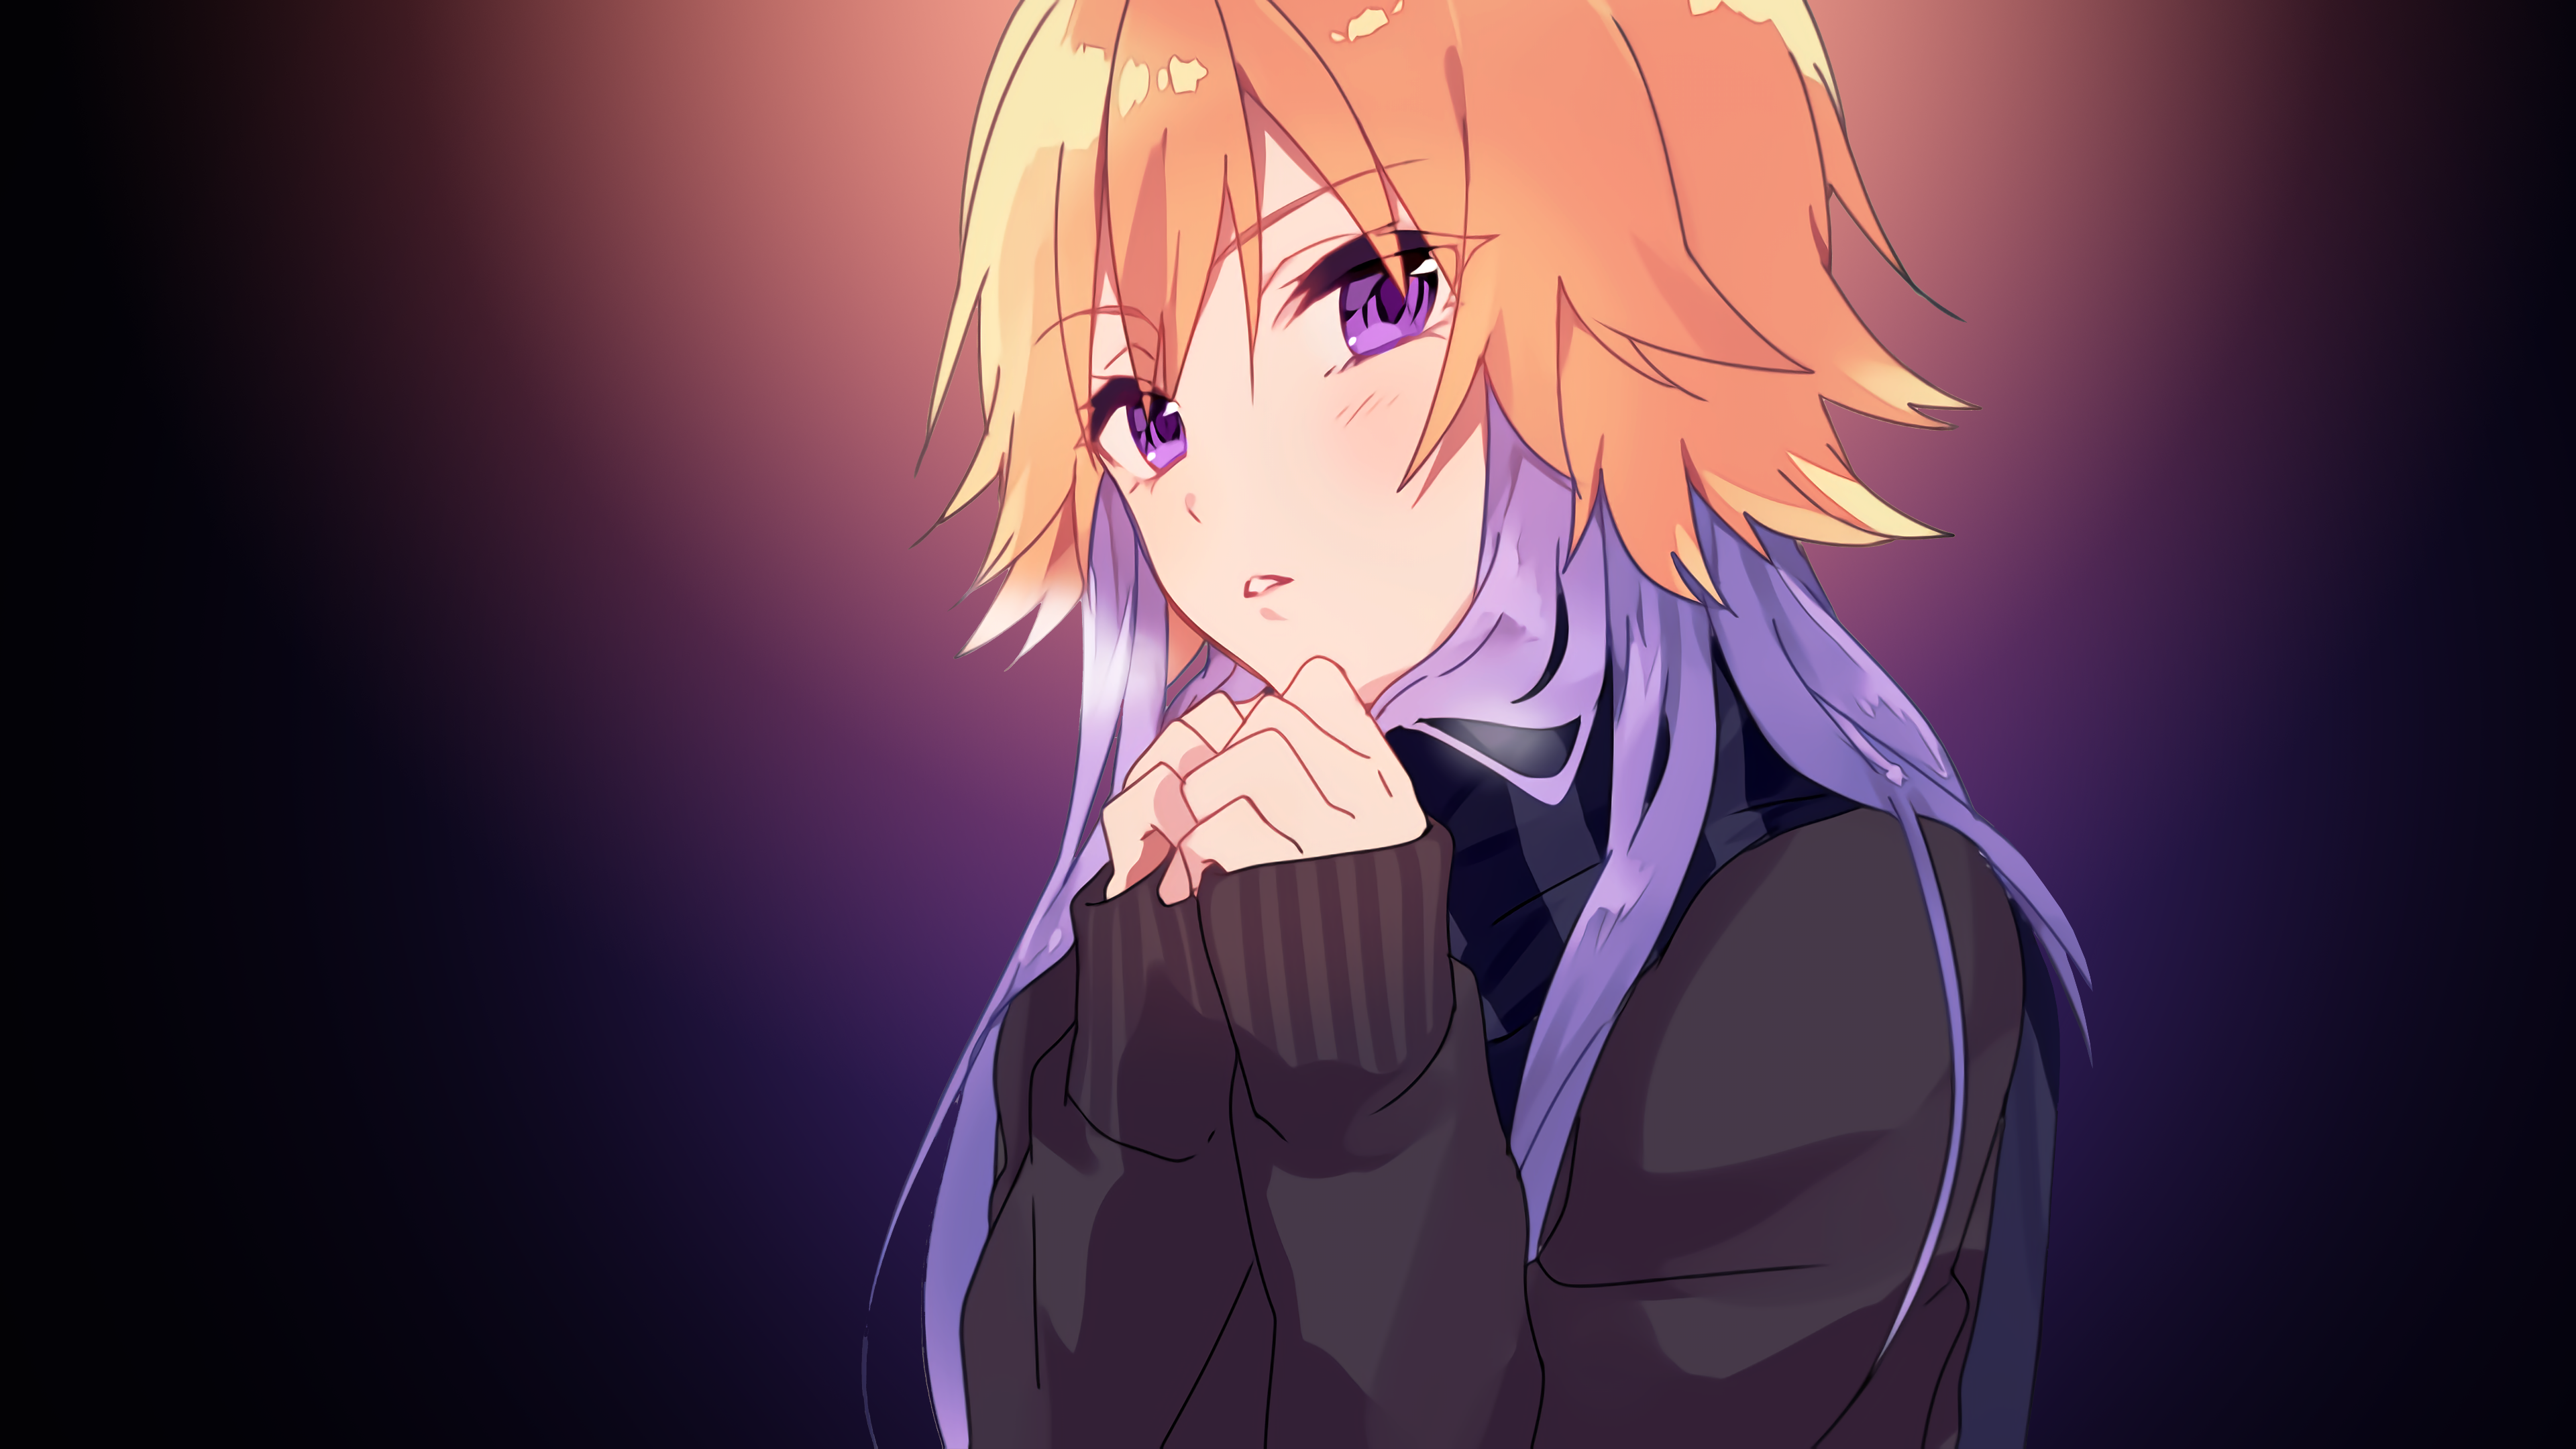 anime girl with short blonde hair and purple eyes